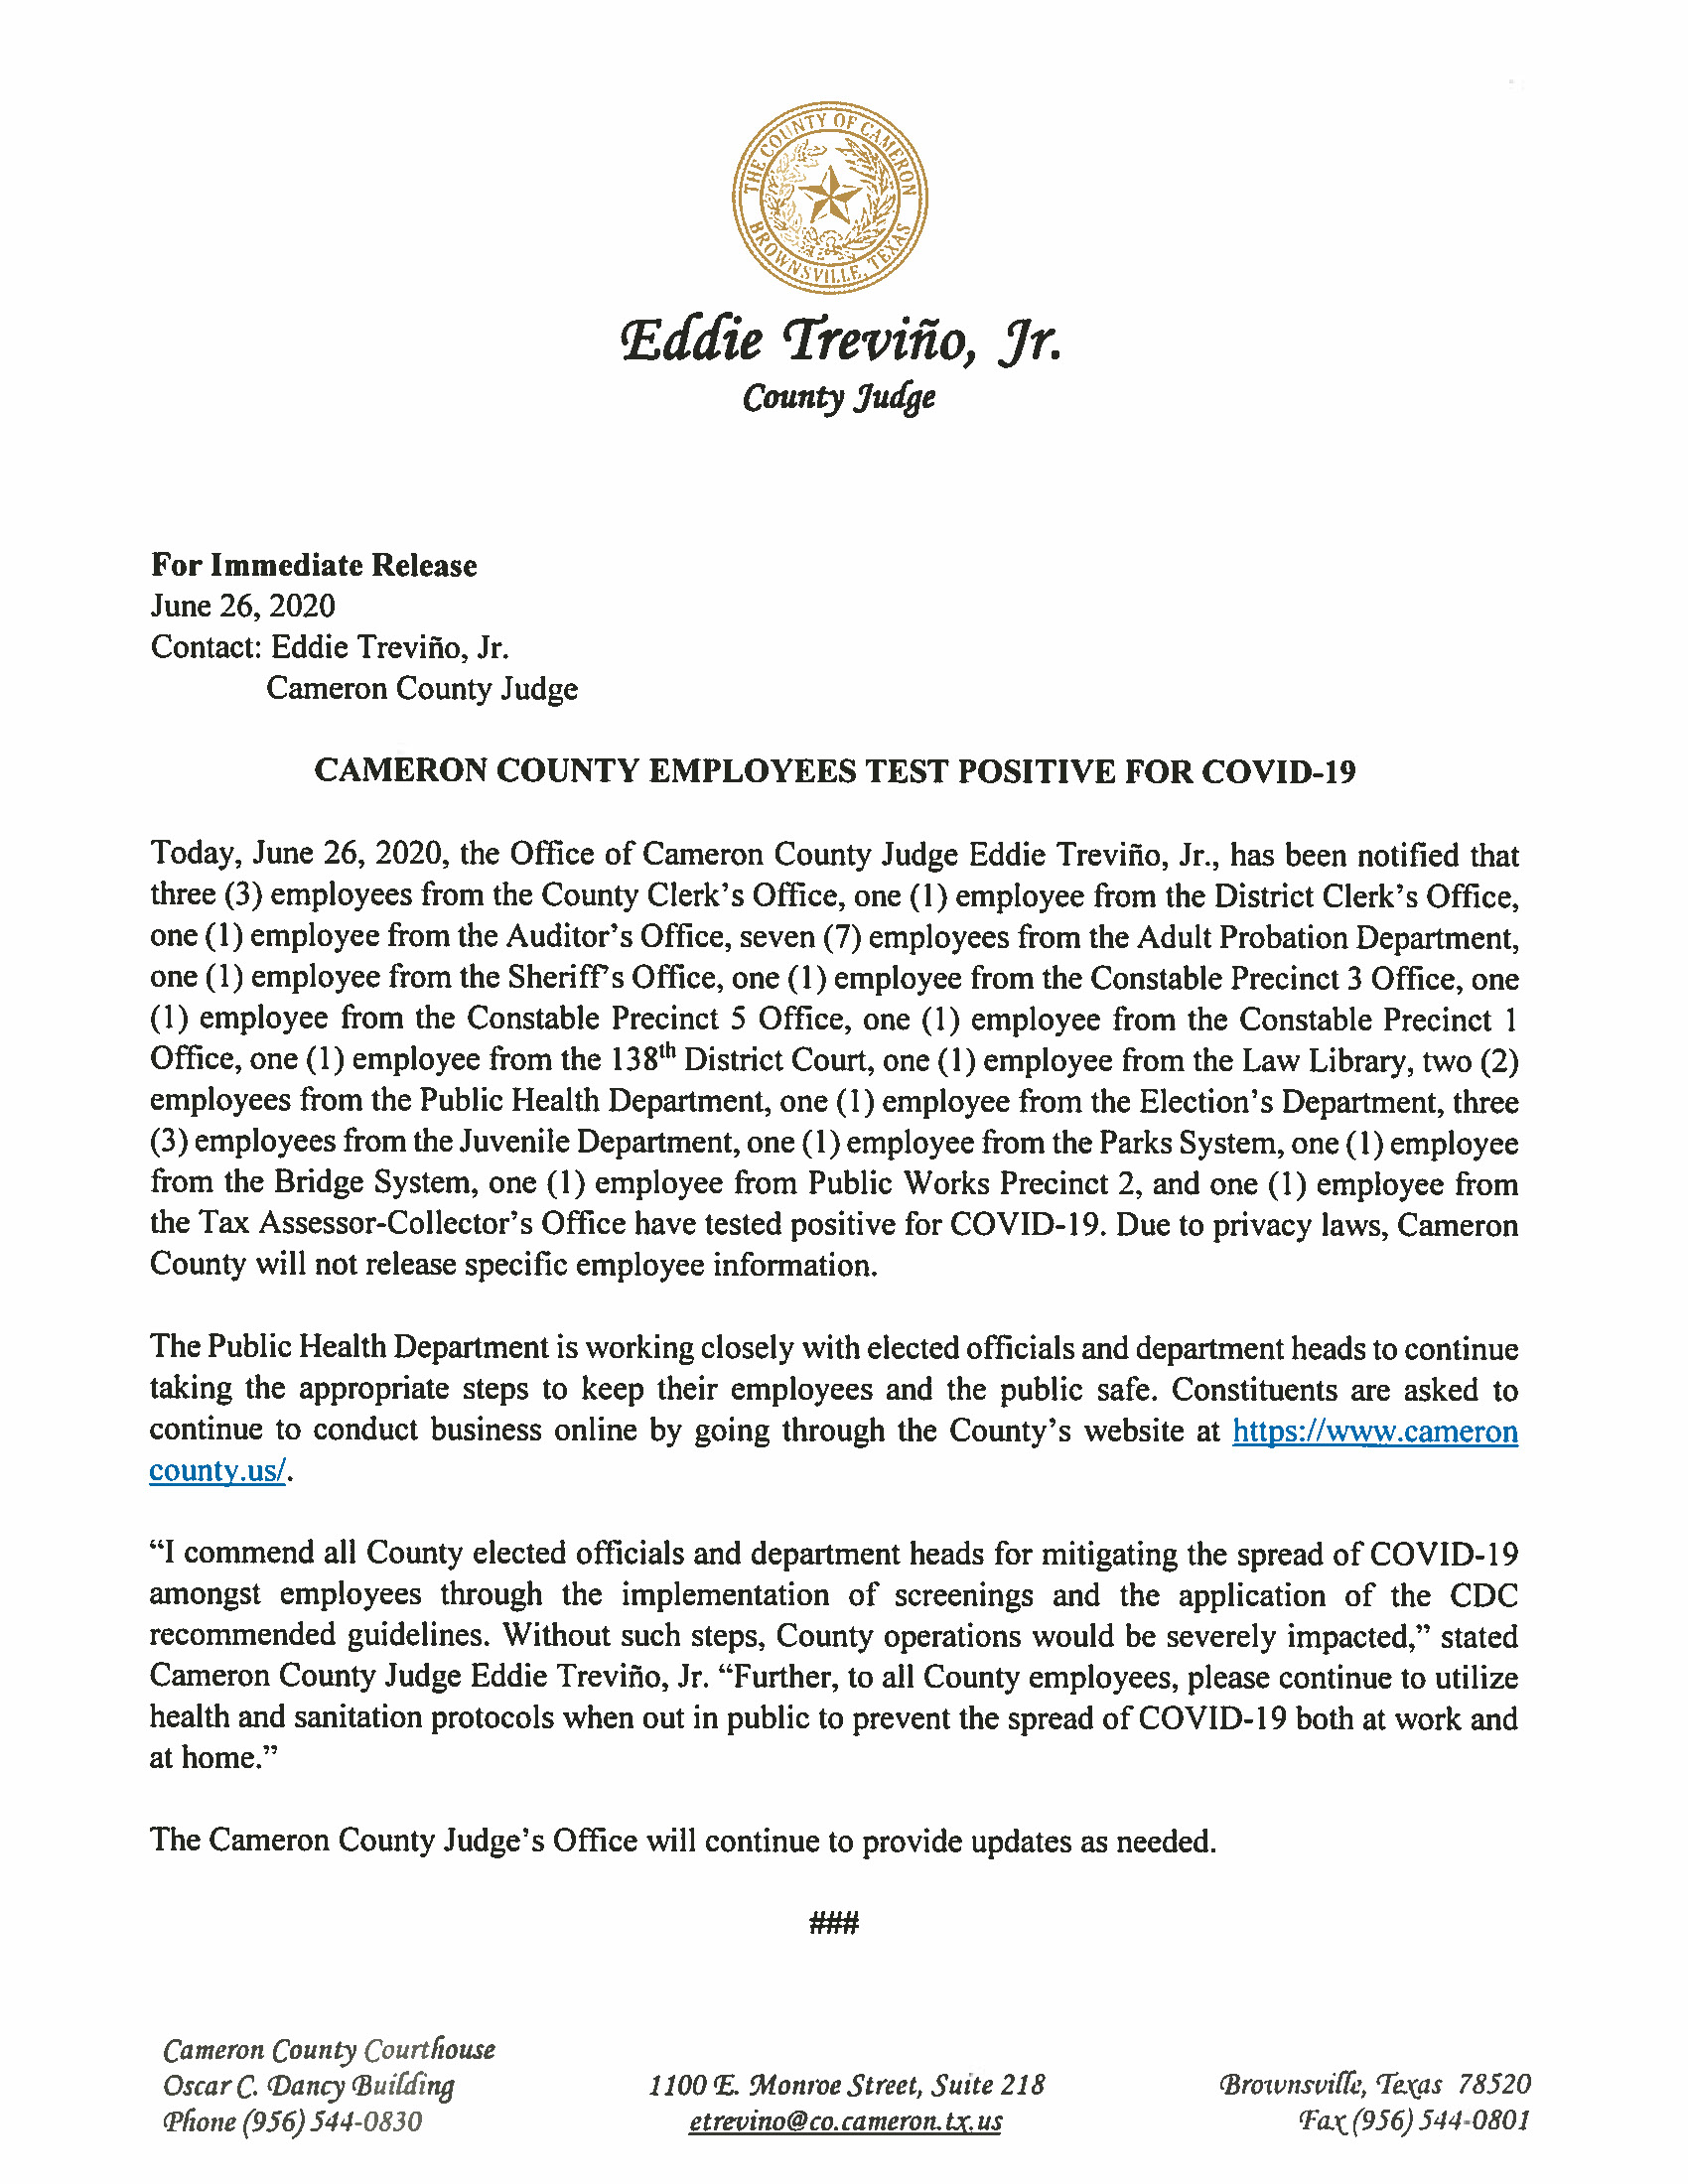 06.26.2020 Cameron County Employees Test Positive For COVID 19